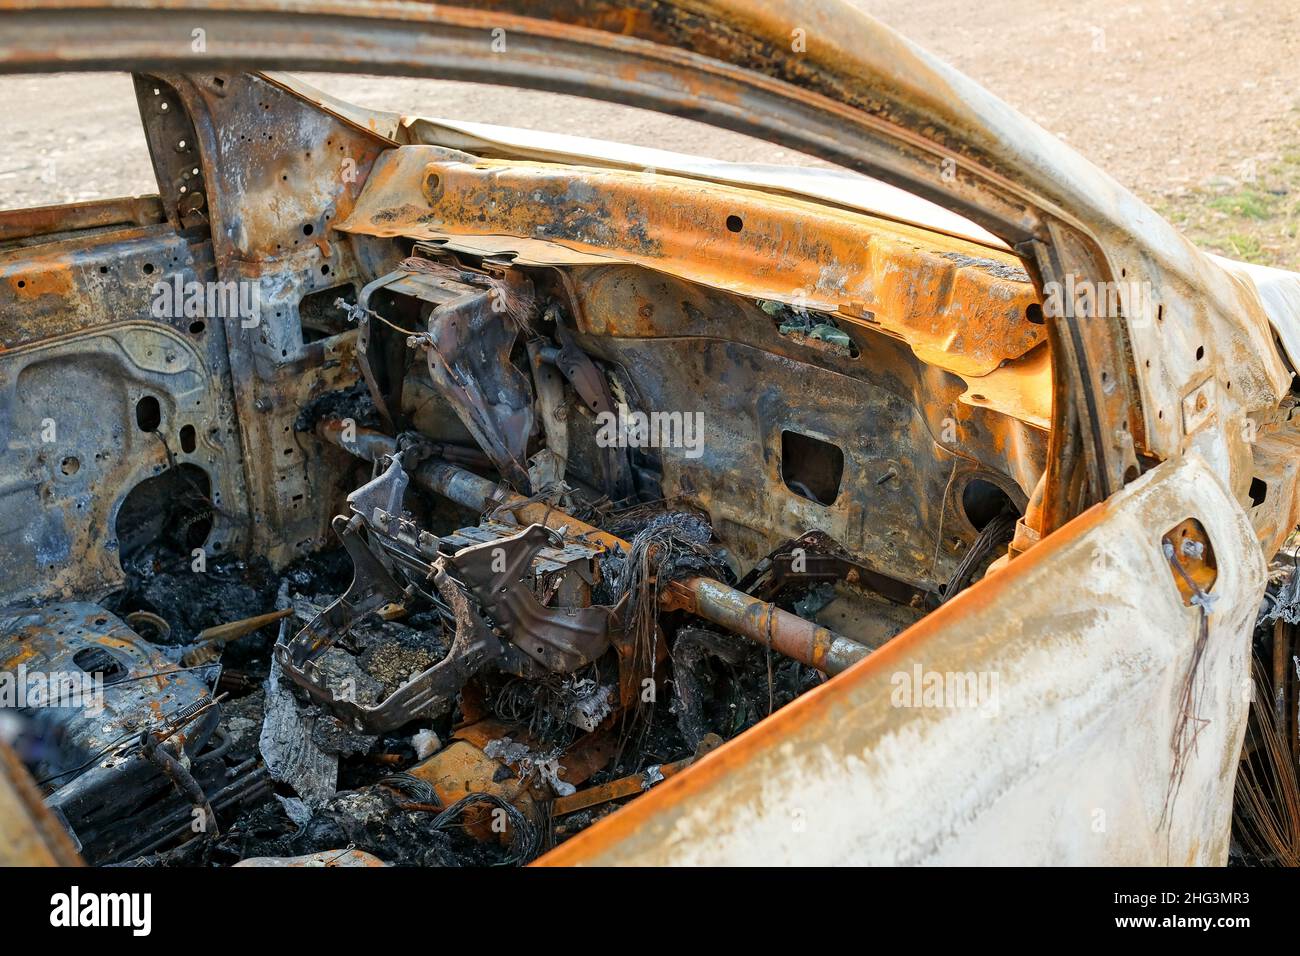 The car after the fire. Iron parts of a burnt car. Stock Photo